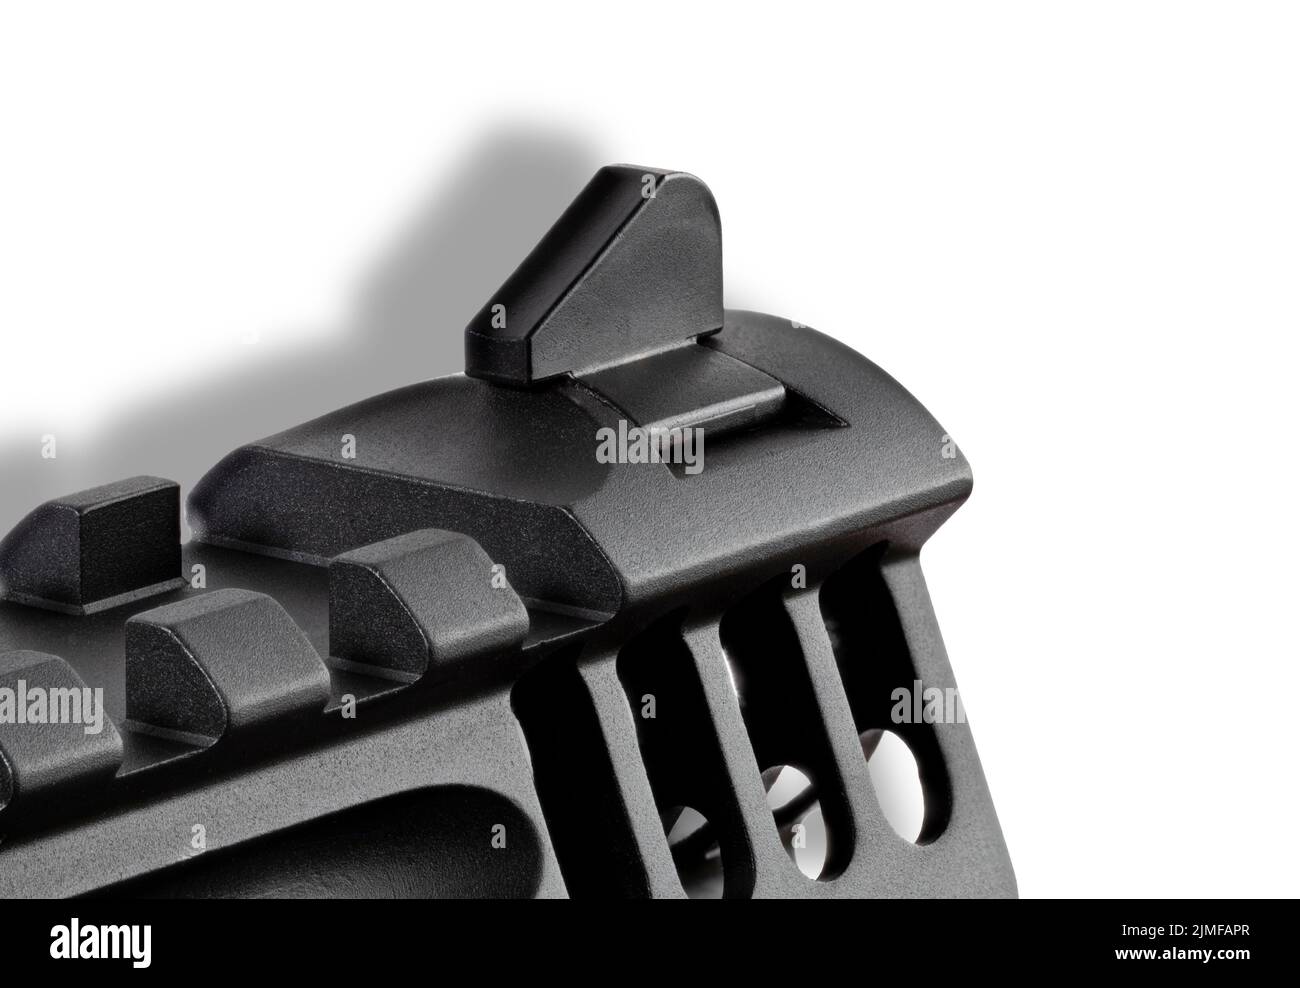 Close up view of the front sight and ports on a high-powered semi automatic handgun on white Stock Photo